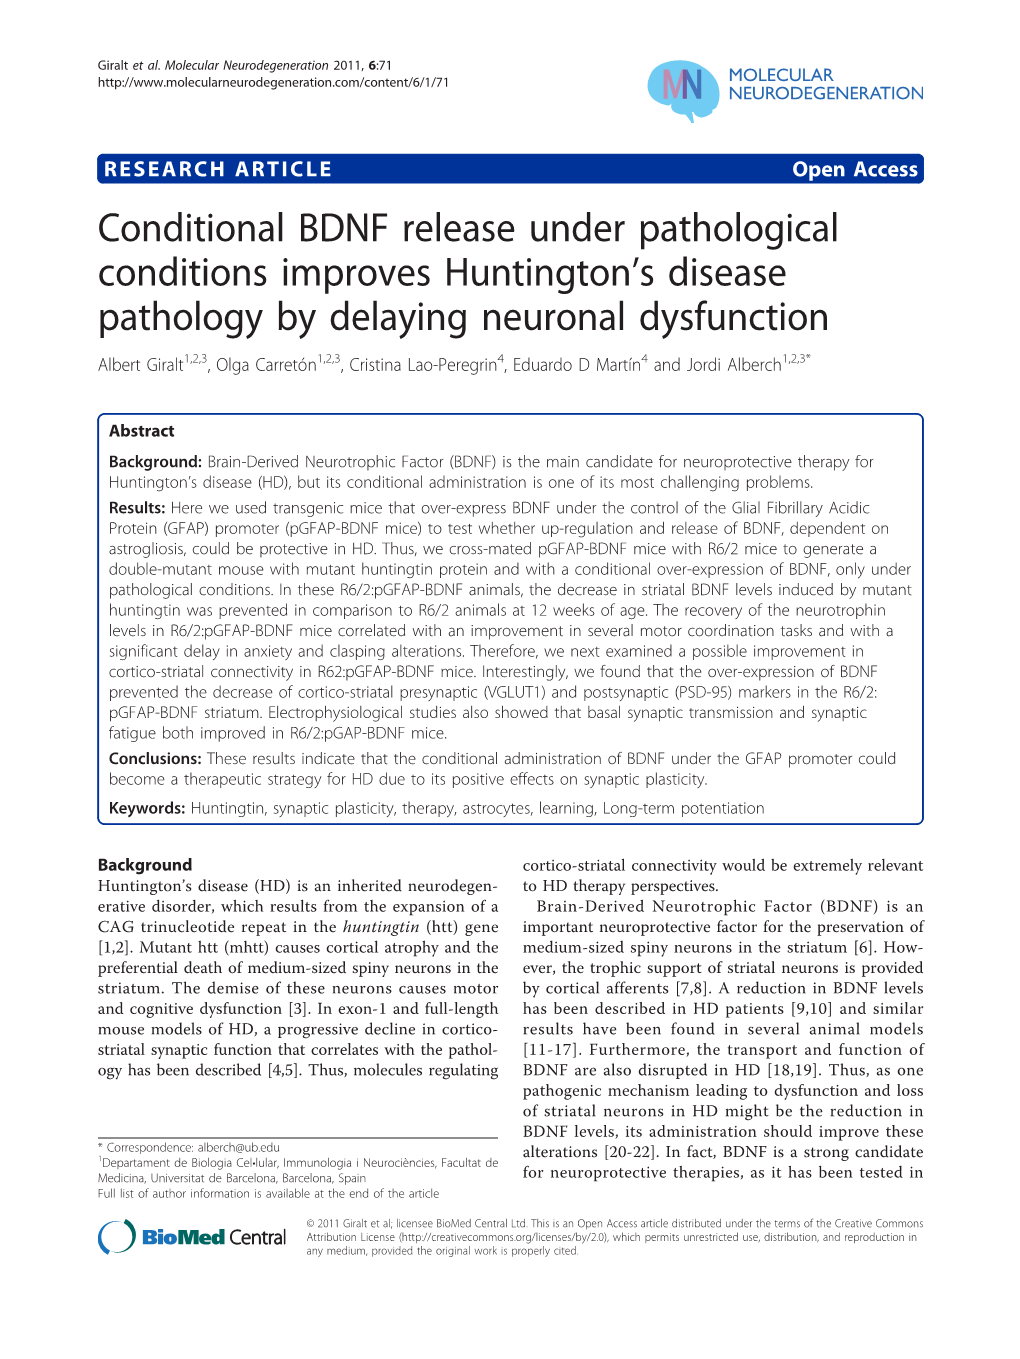 Conditional BDNF Release Under Pathological Conditions Improves